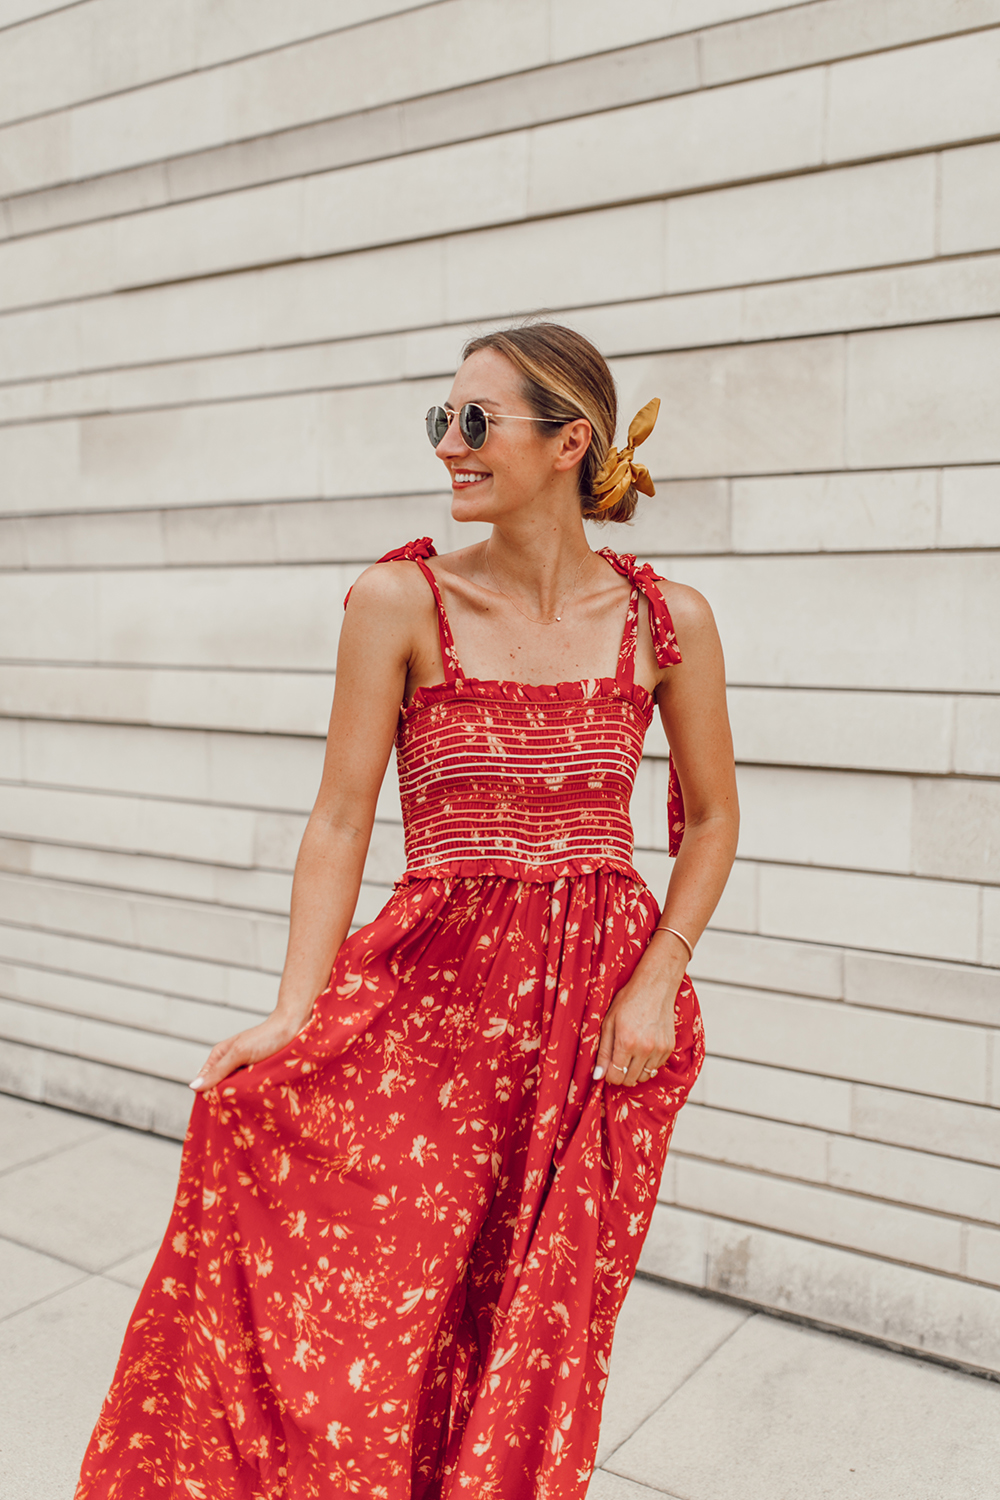 livvyland-blog-olivia-watson-austin-texas-fashion-style-blogger-free-people-red-maxi-dress-jumper-jumpsuit-summer-bbq-outfit-idea-3